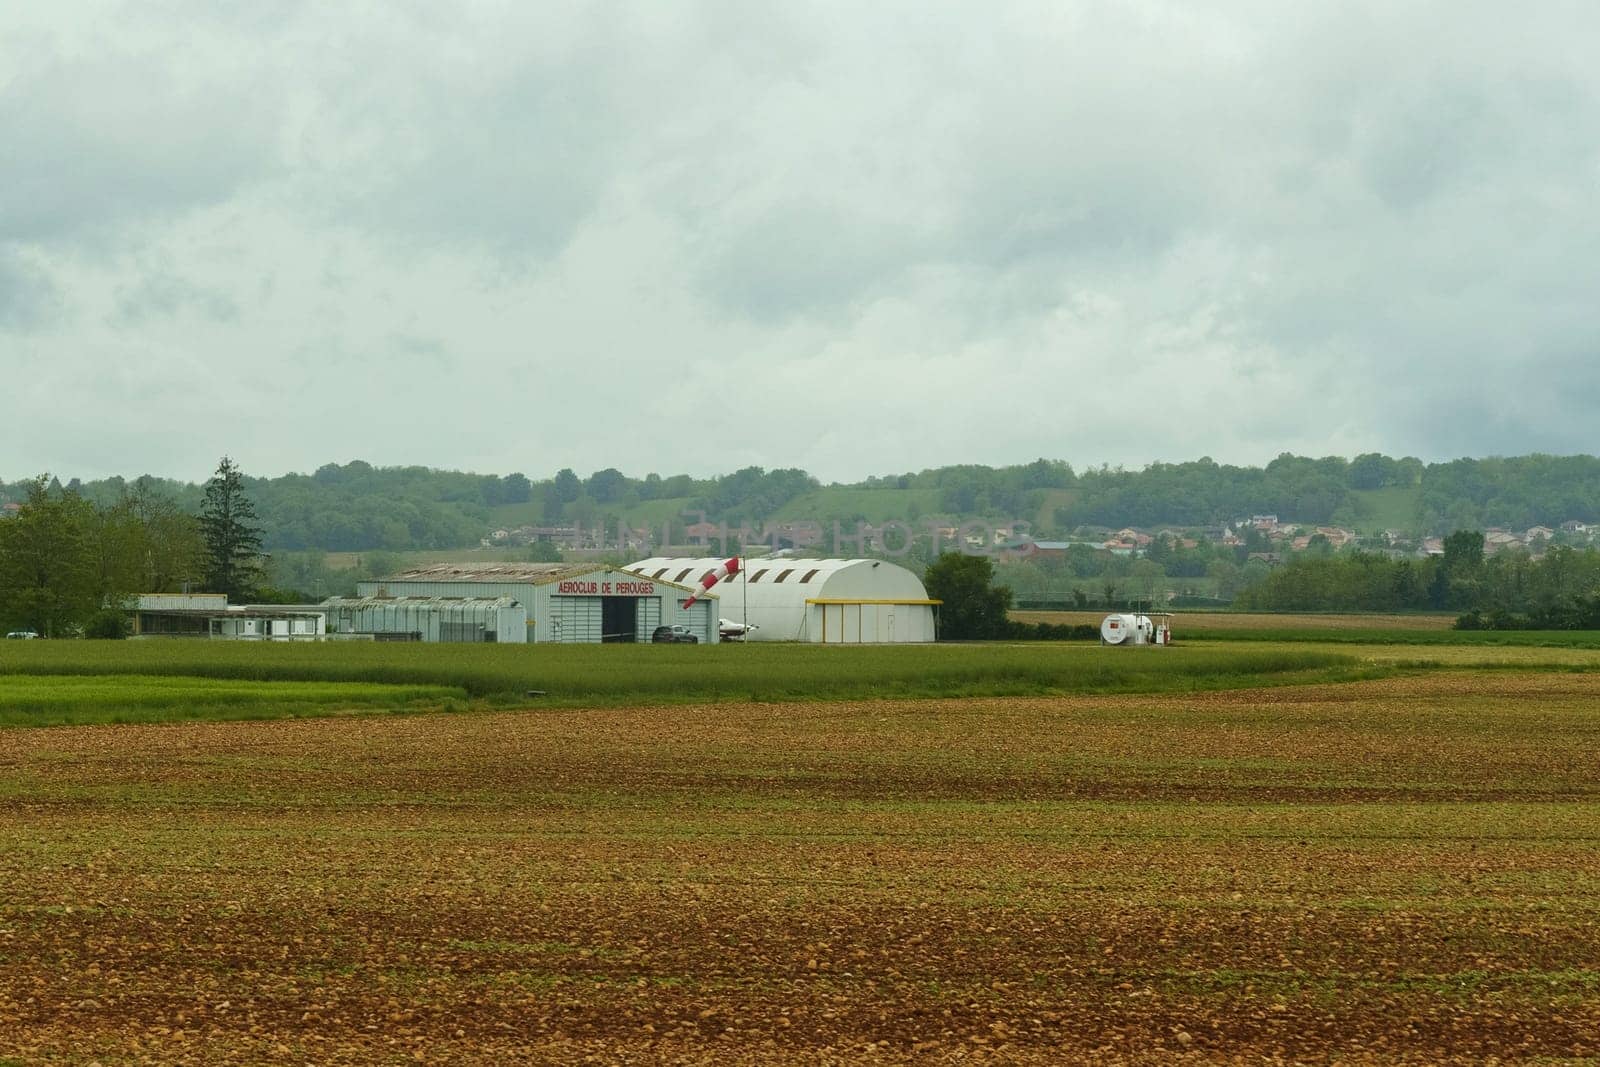 Aeroclub De Perouges in Rural France on a Cloudy Day in Spring by Sd28DimoN_1976